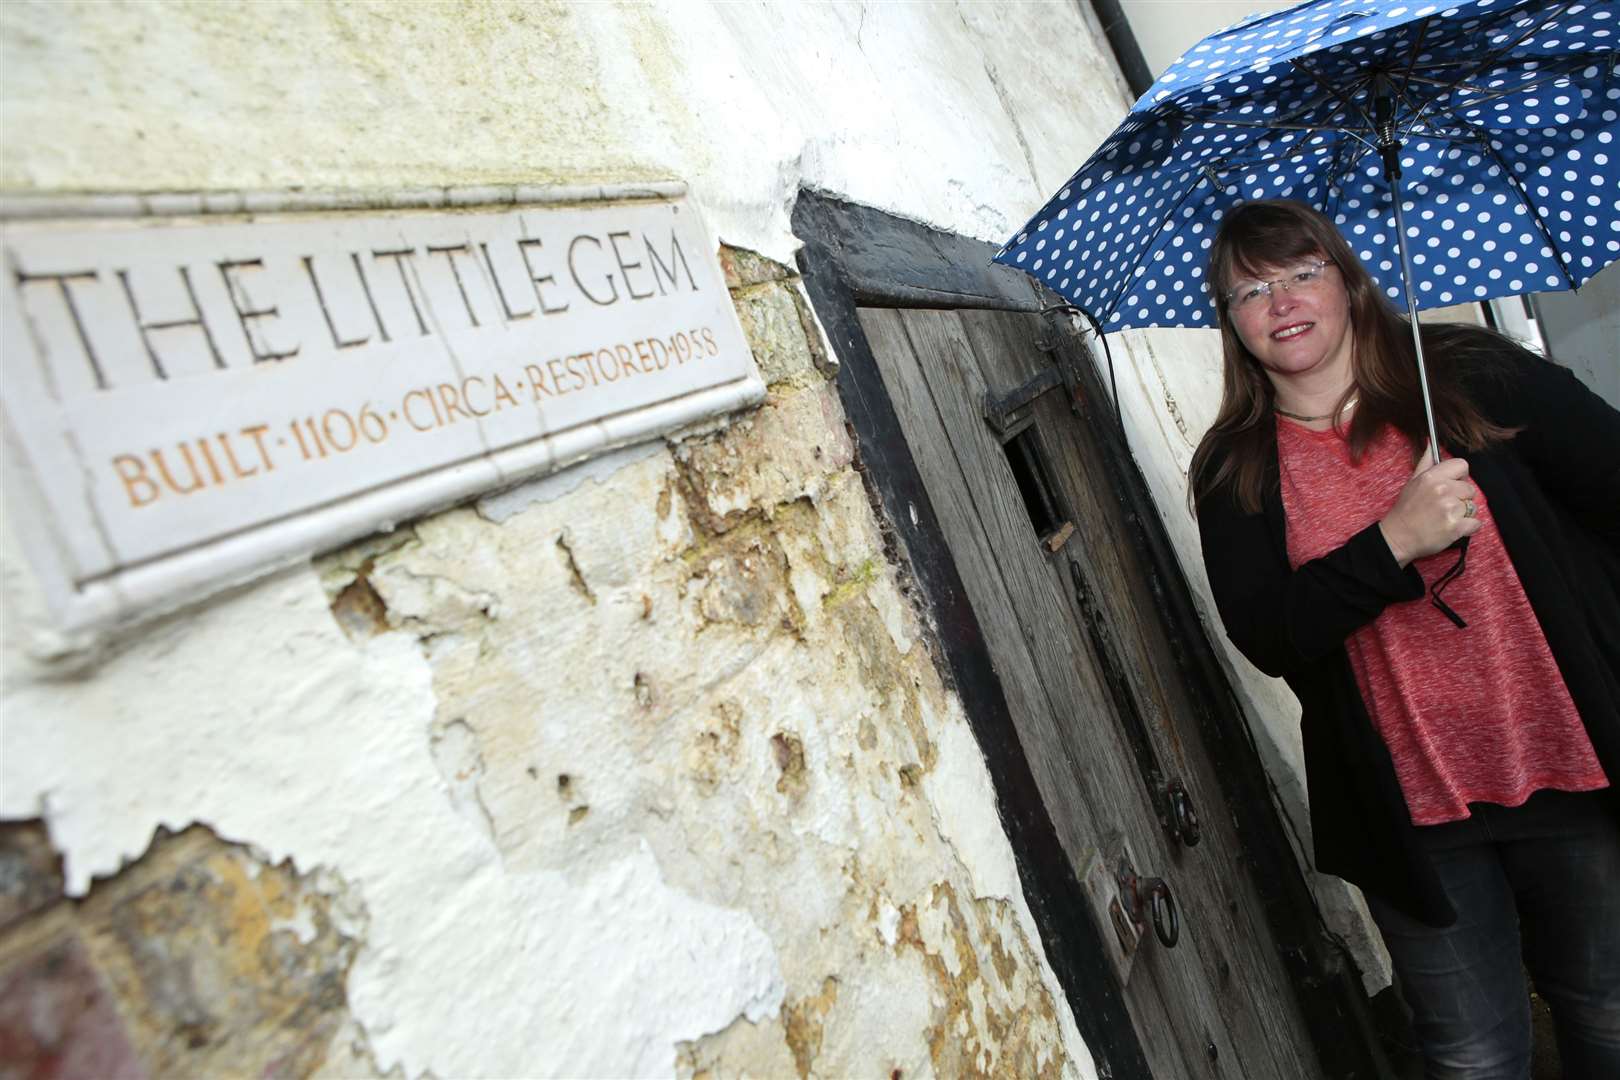 Lin Sharpe outside the Little Gem, with the plaque stating it was built in 1106